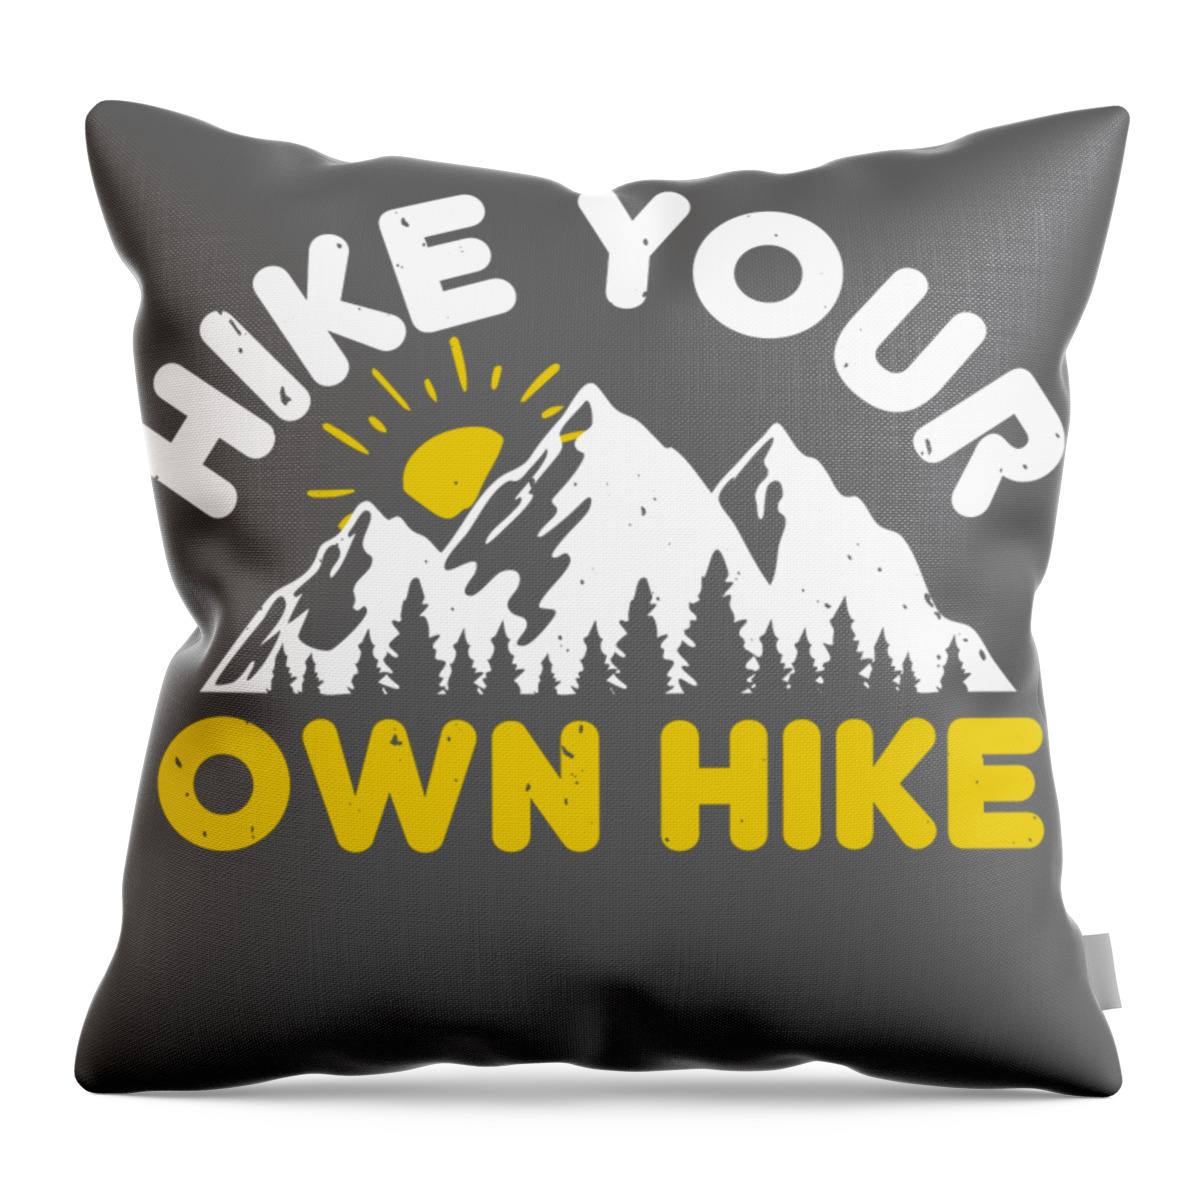 Hiker Throw Pillow featuring the digital art Hiker Gift Hike Your Own Hike Funny Hiking by Jeff Creation